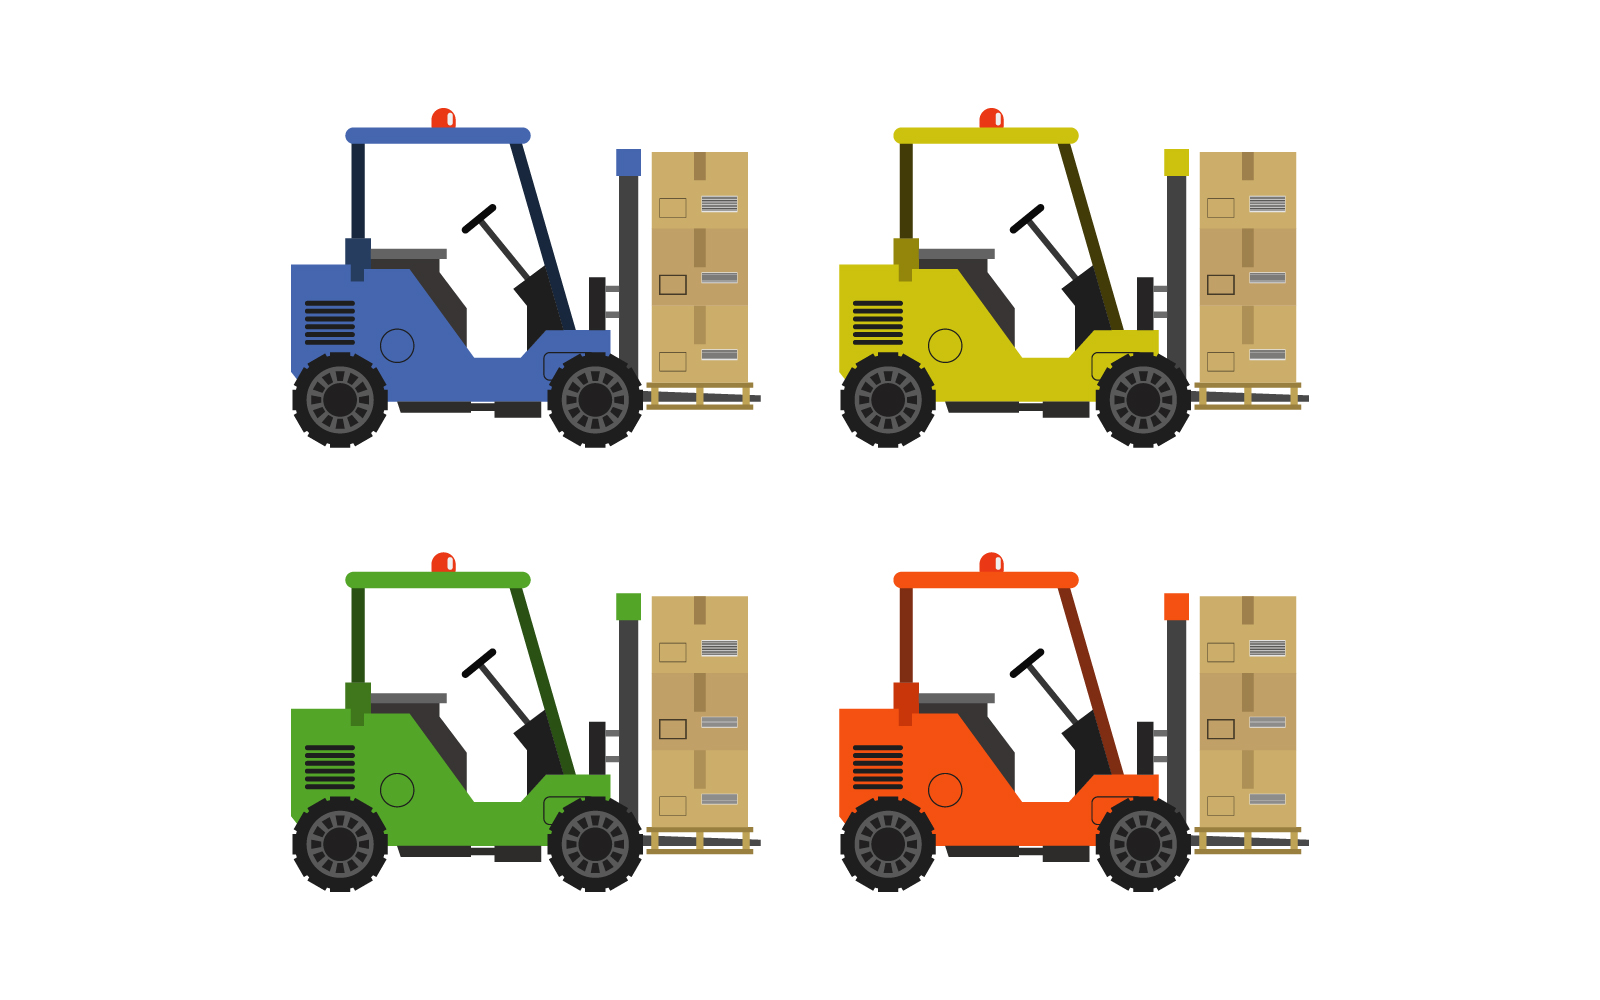 Forklift illustrated in vector and colored